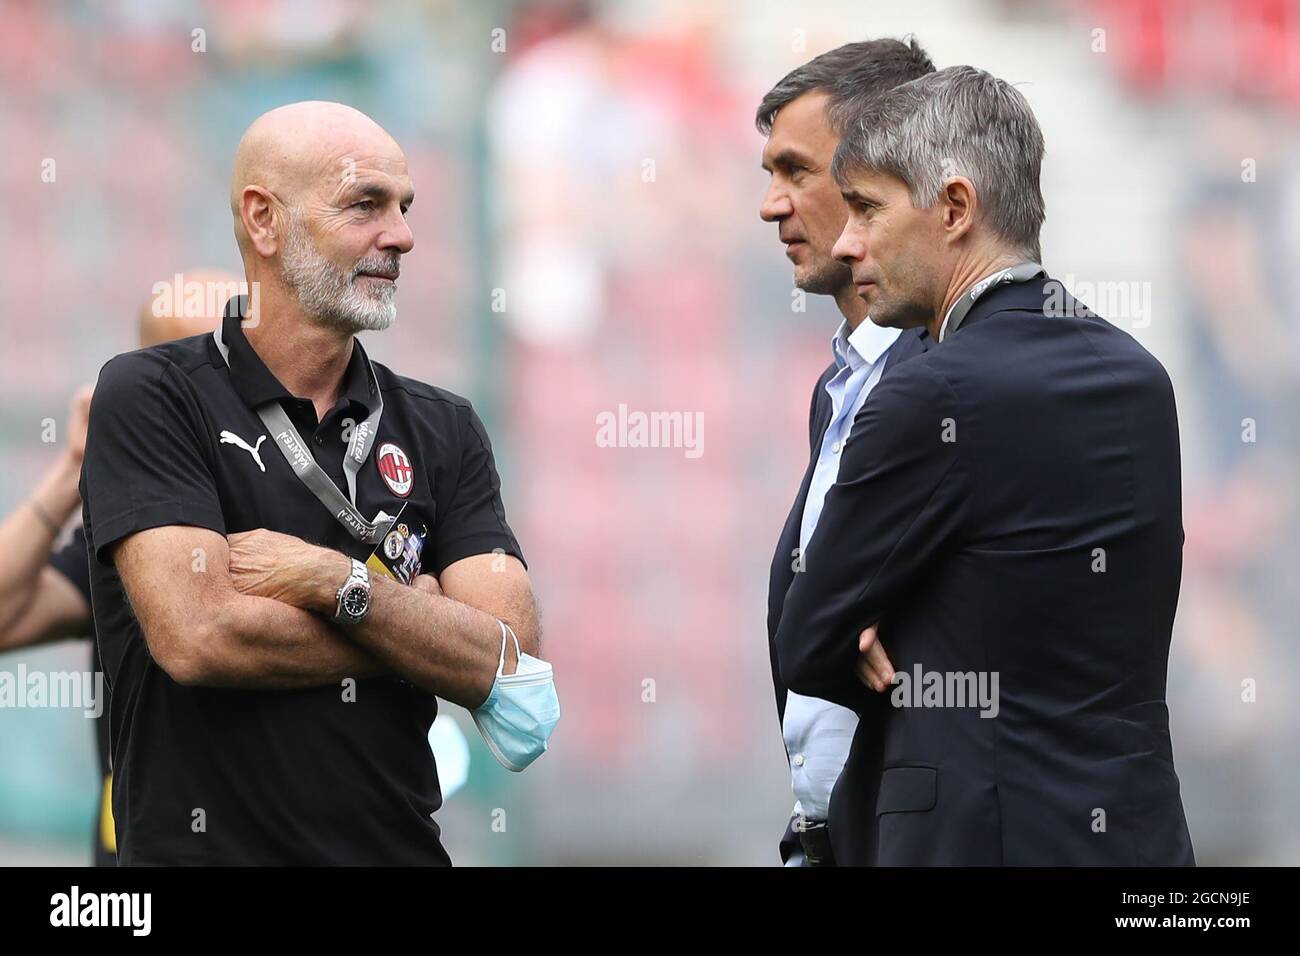 Klagenfurt, Austria, 8th August 2021. Stefano Pioli Head coach of AC Milan  discusses with AC Milan Director of Sport Federico Massara as Paolo Maldini AC  Milan First Team Technical Director as the